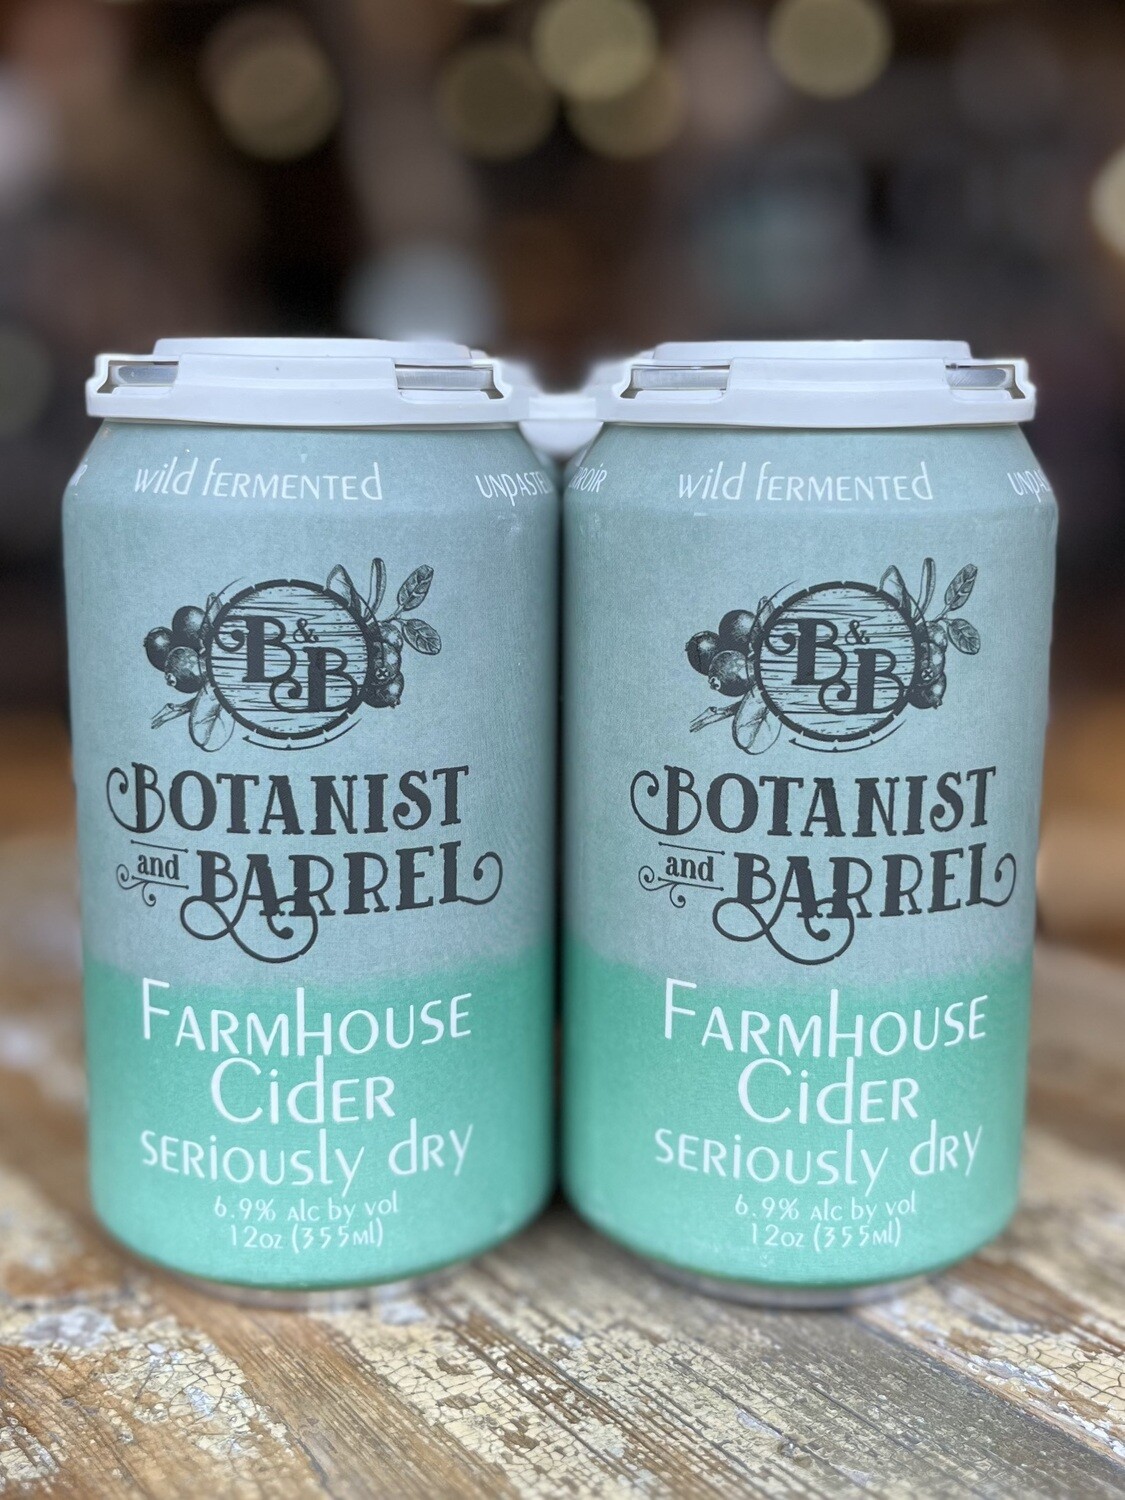 Botanist and Barrel Seriously Dry Farmhouse Cider